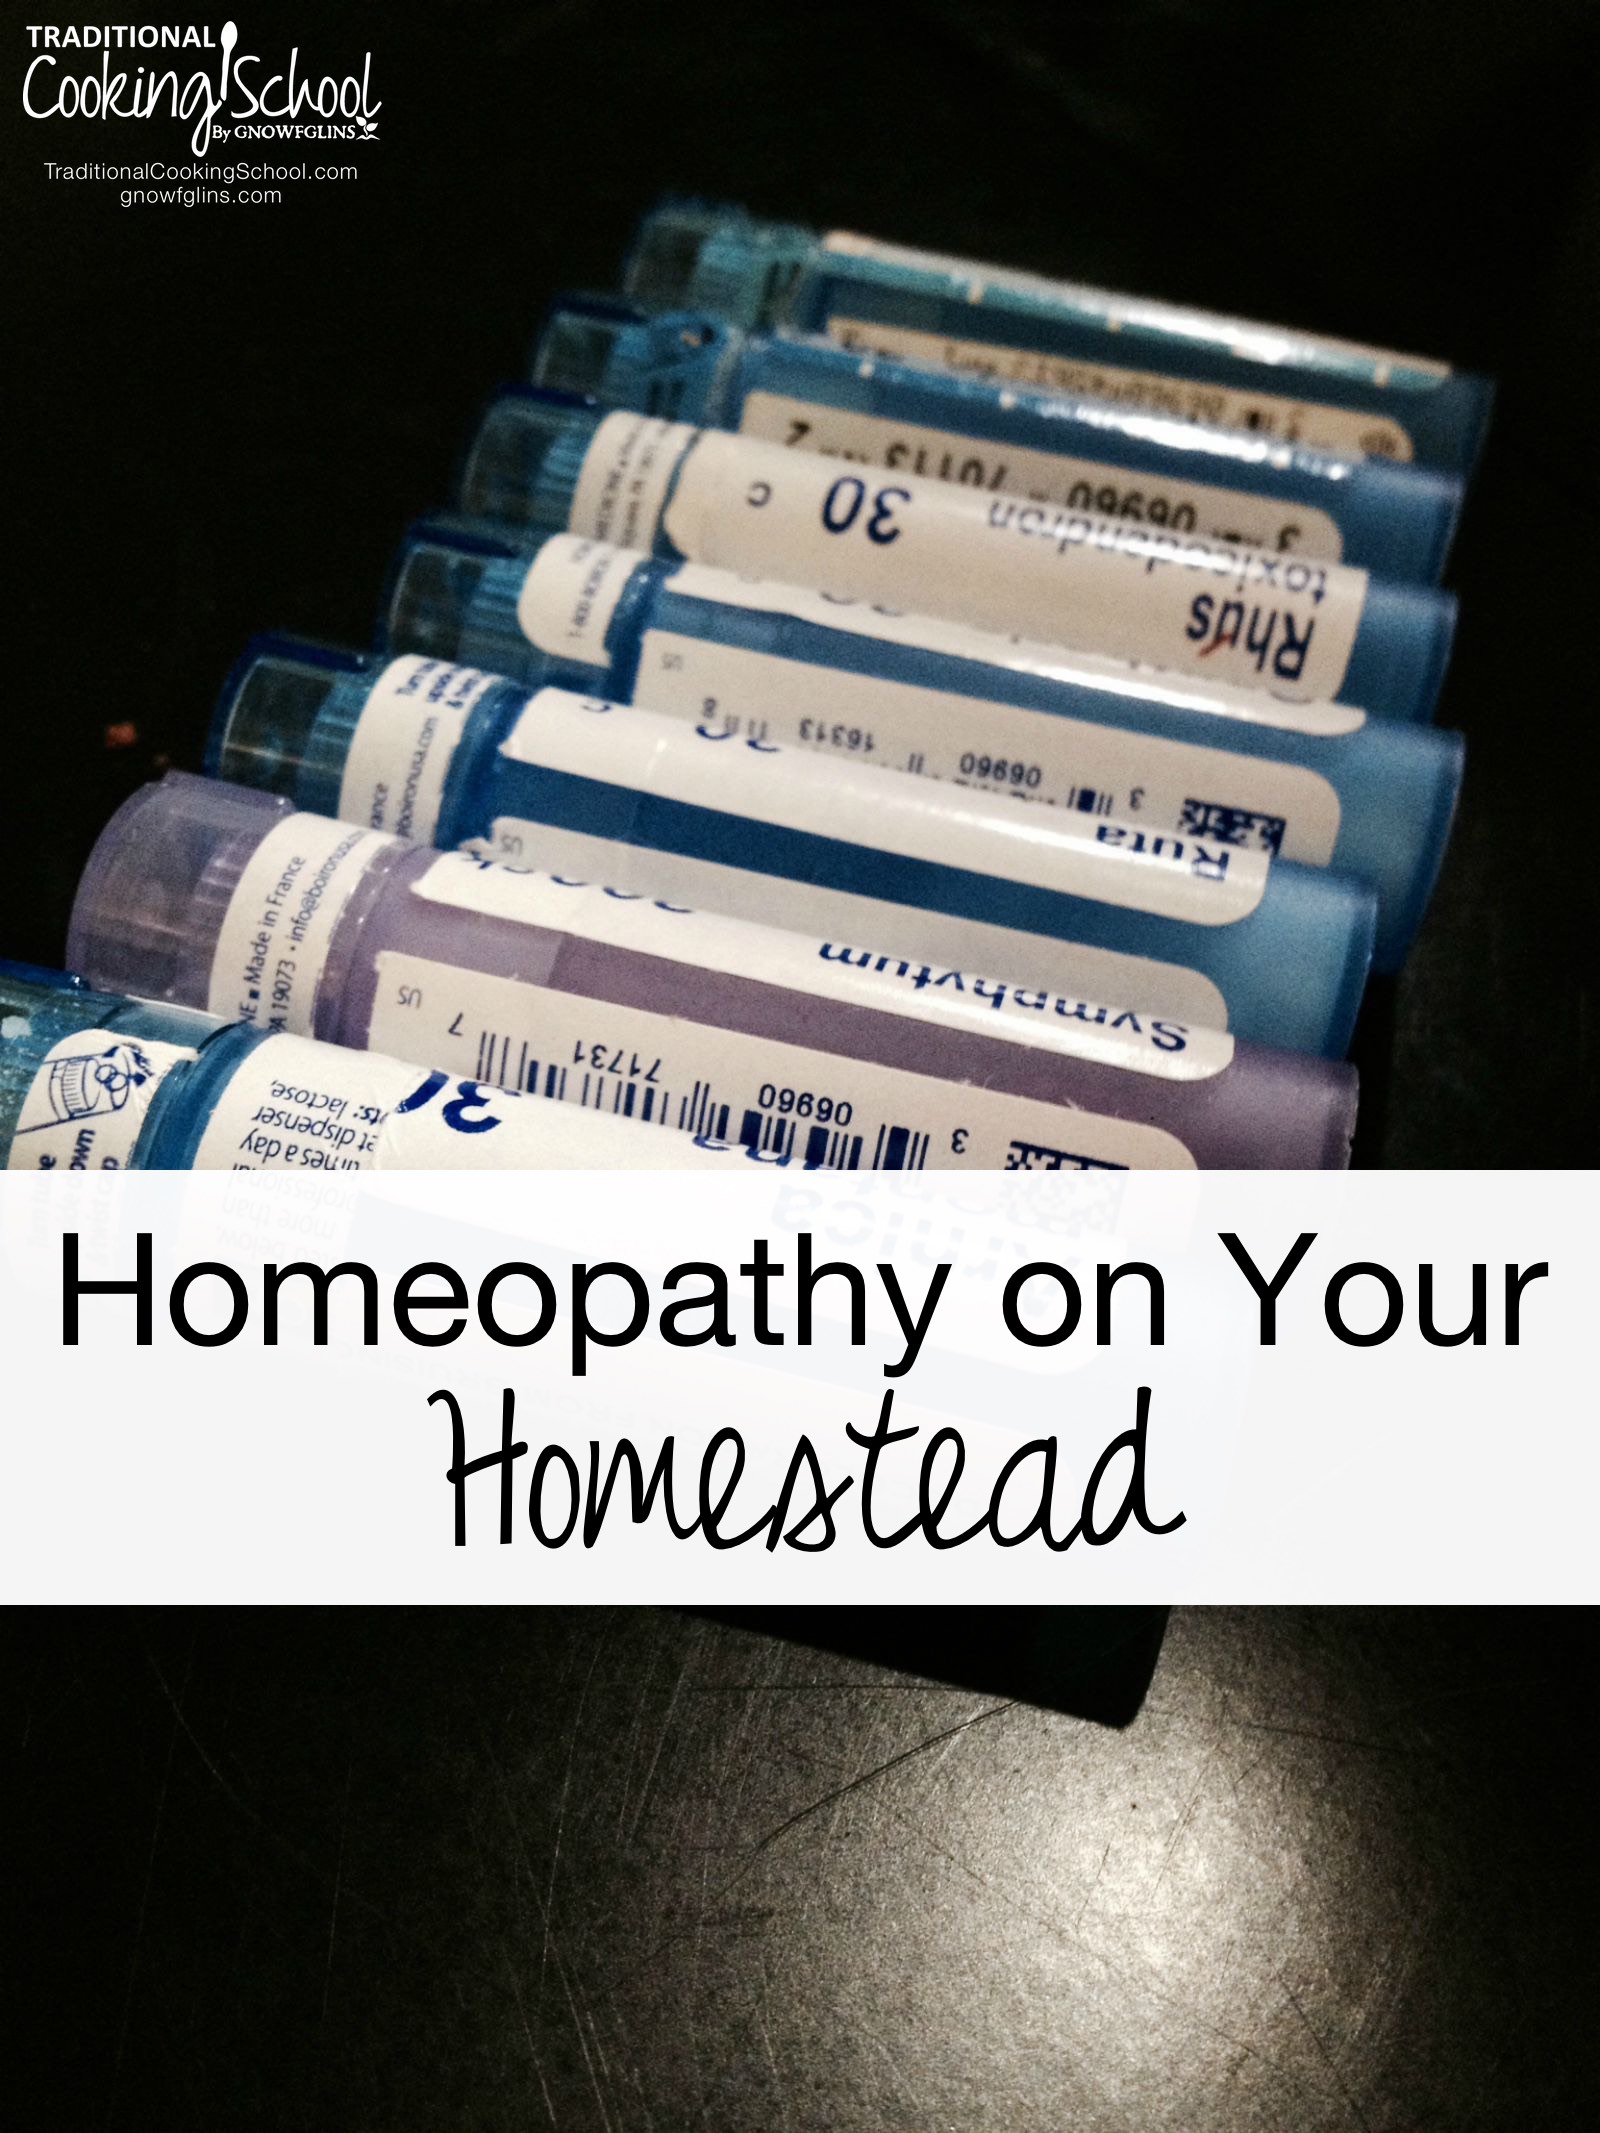 Homeopathy on Your Homestead | It isn't herbal supplements, it isn't vitamins, it isn't magic. At its simplest, homeopathy stimulates the body's innate healing ability. What it is, how it works, and your other burning questions about homeopathy... answered. | TraditionalCookingSchool.com